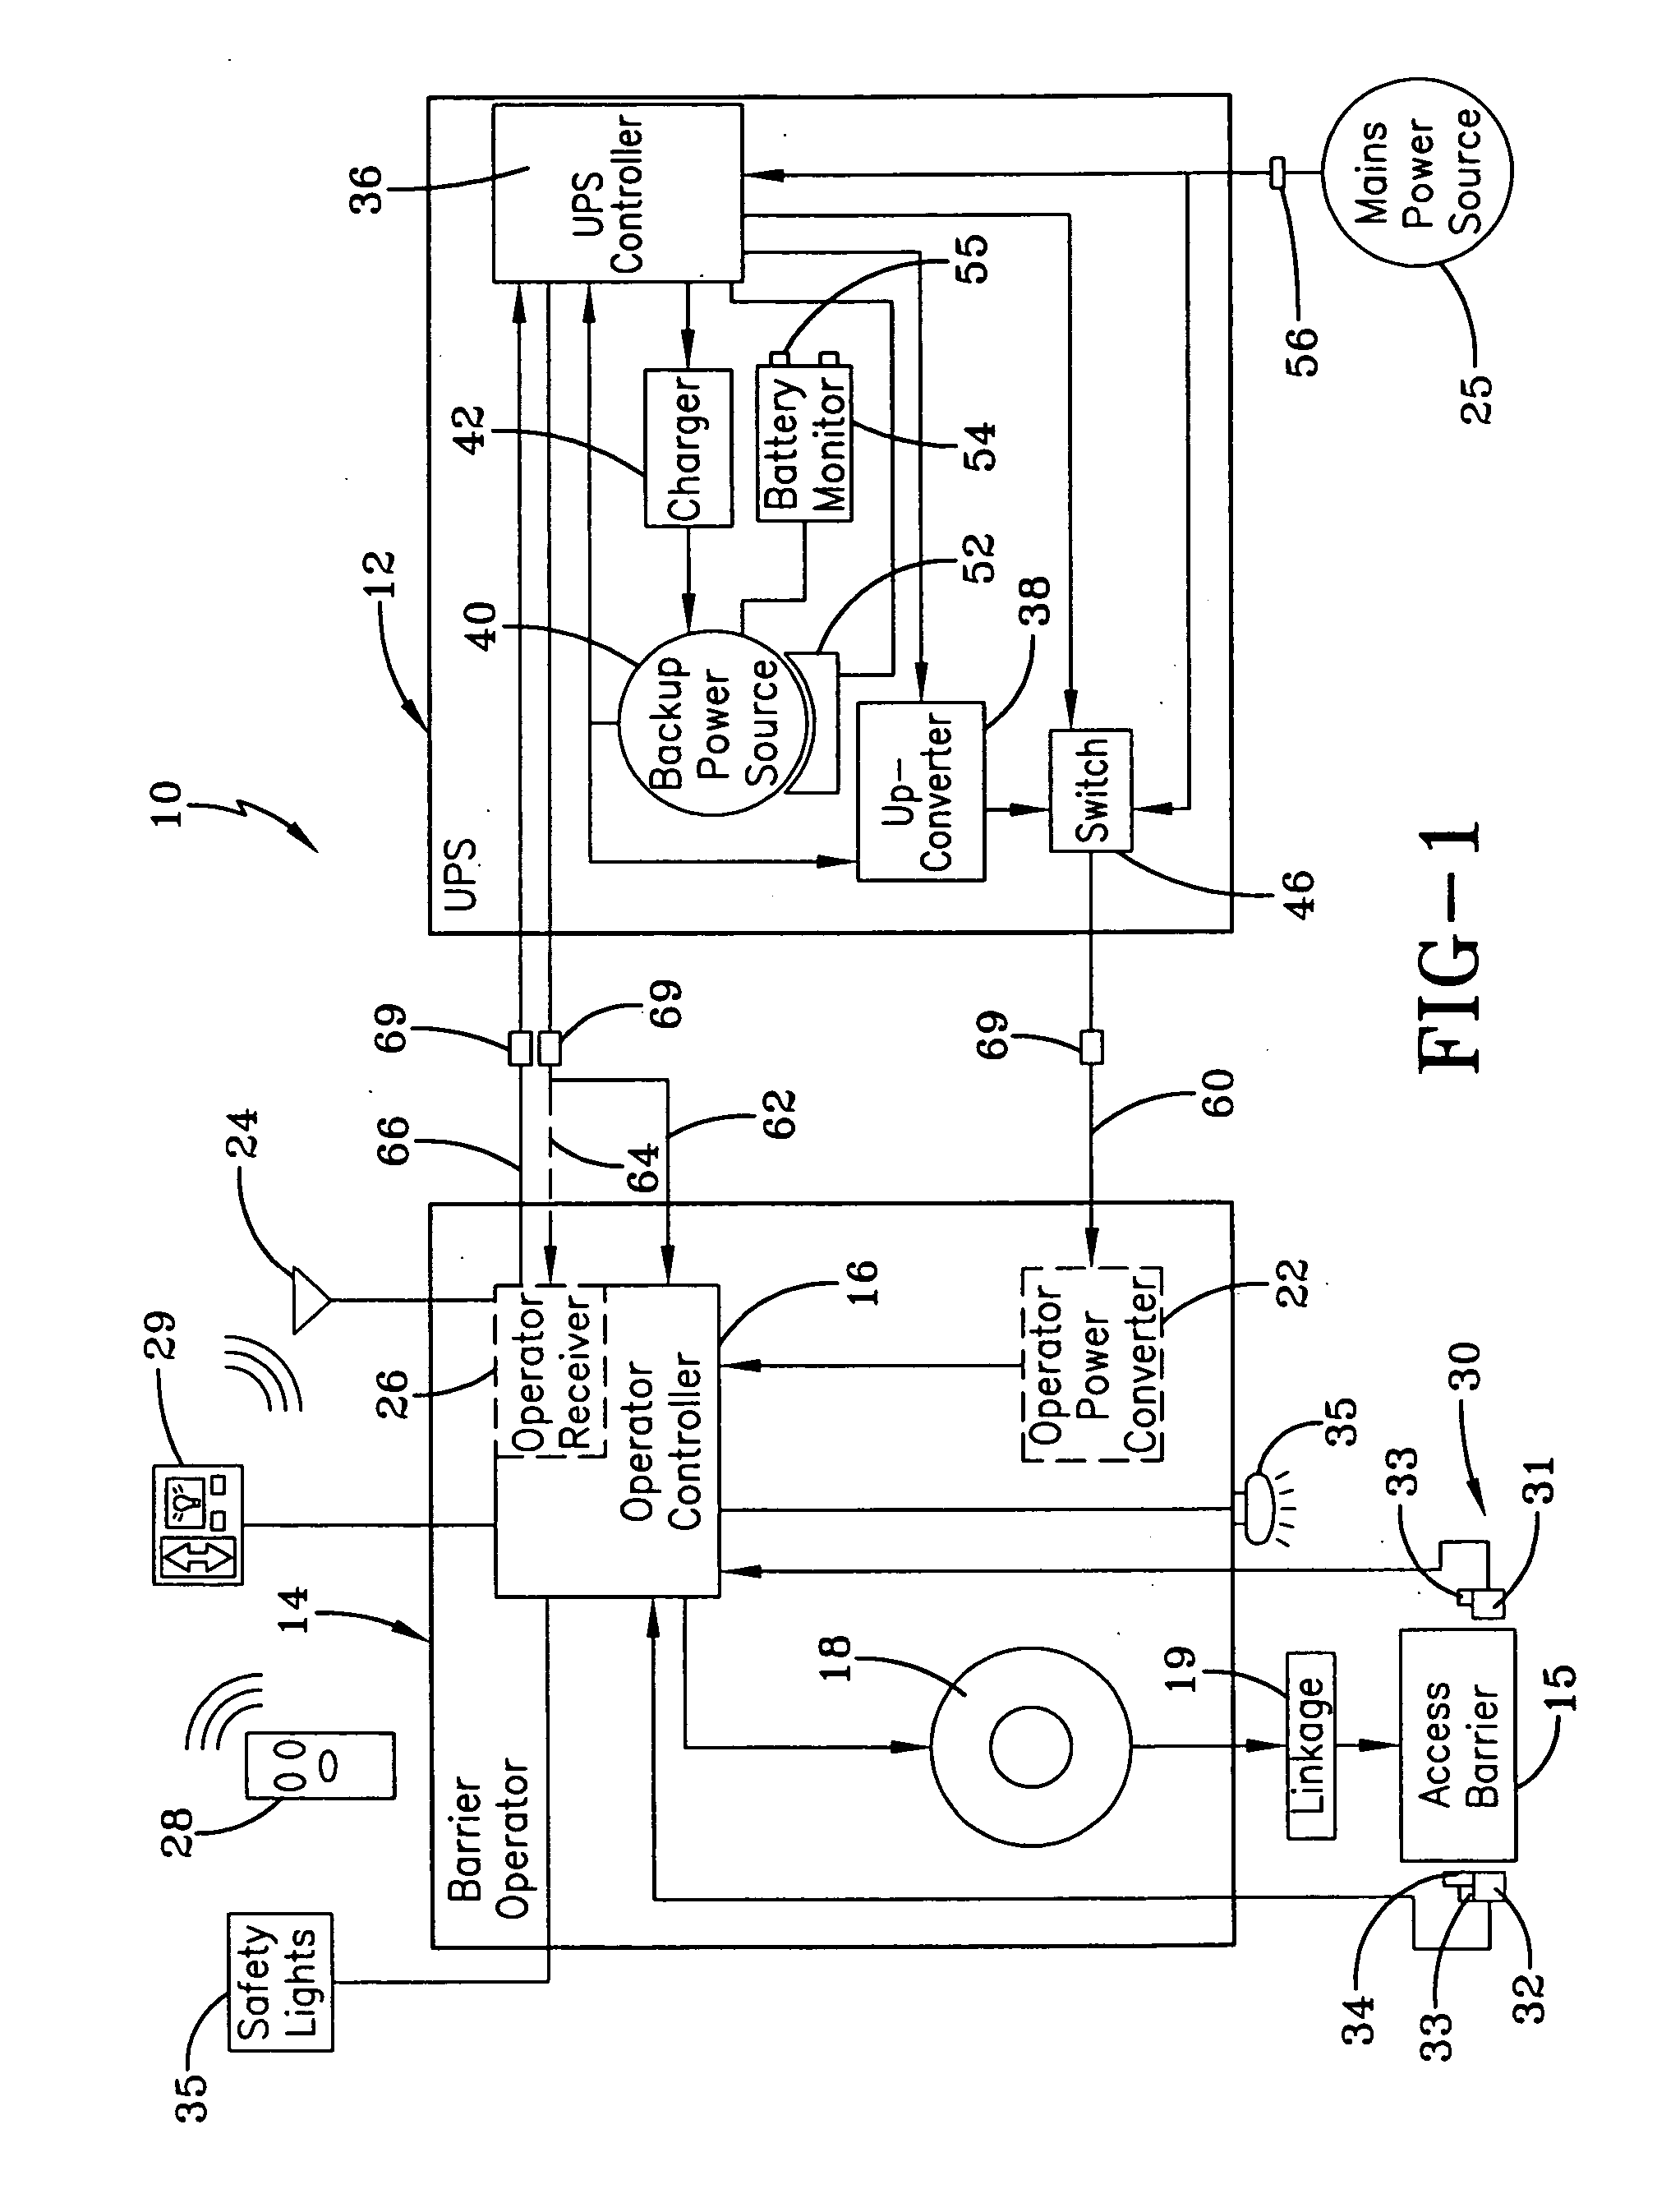 Uninterruptible power source for a barrier operator and related methods